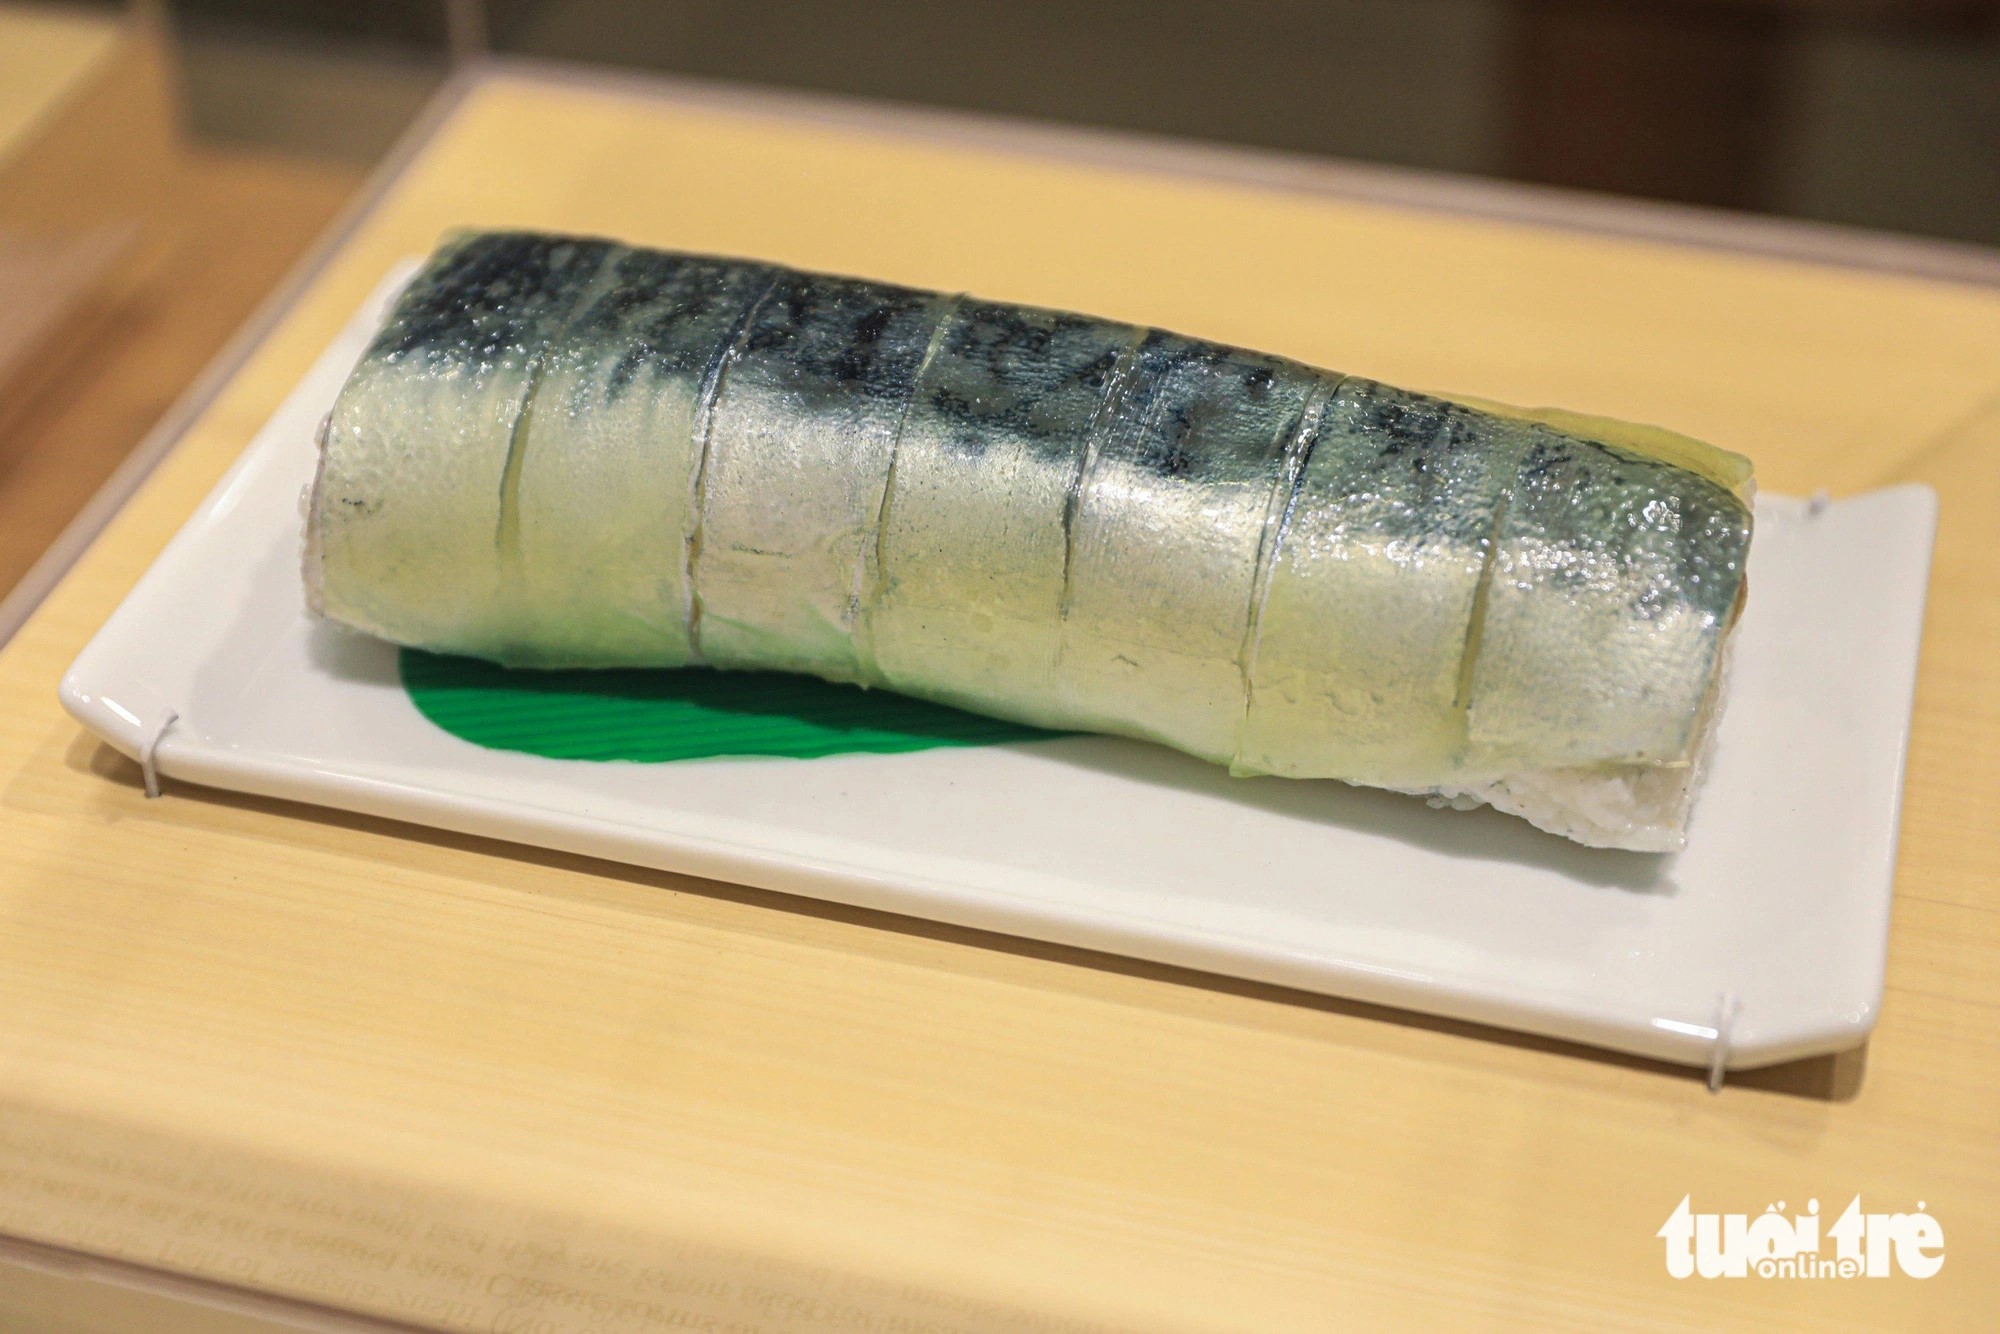 Maki-zushi has emerged as a simple and economical food option, often wrapped in nori seaweed for easy consumption. Photo: Danh Khang / Tuoi Tre